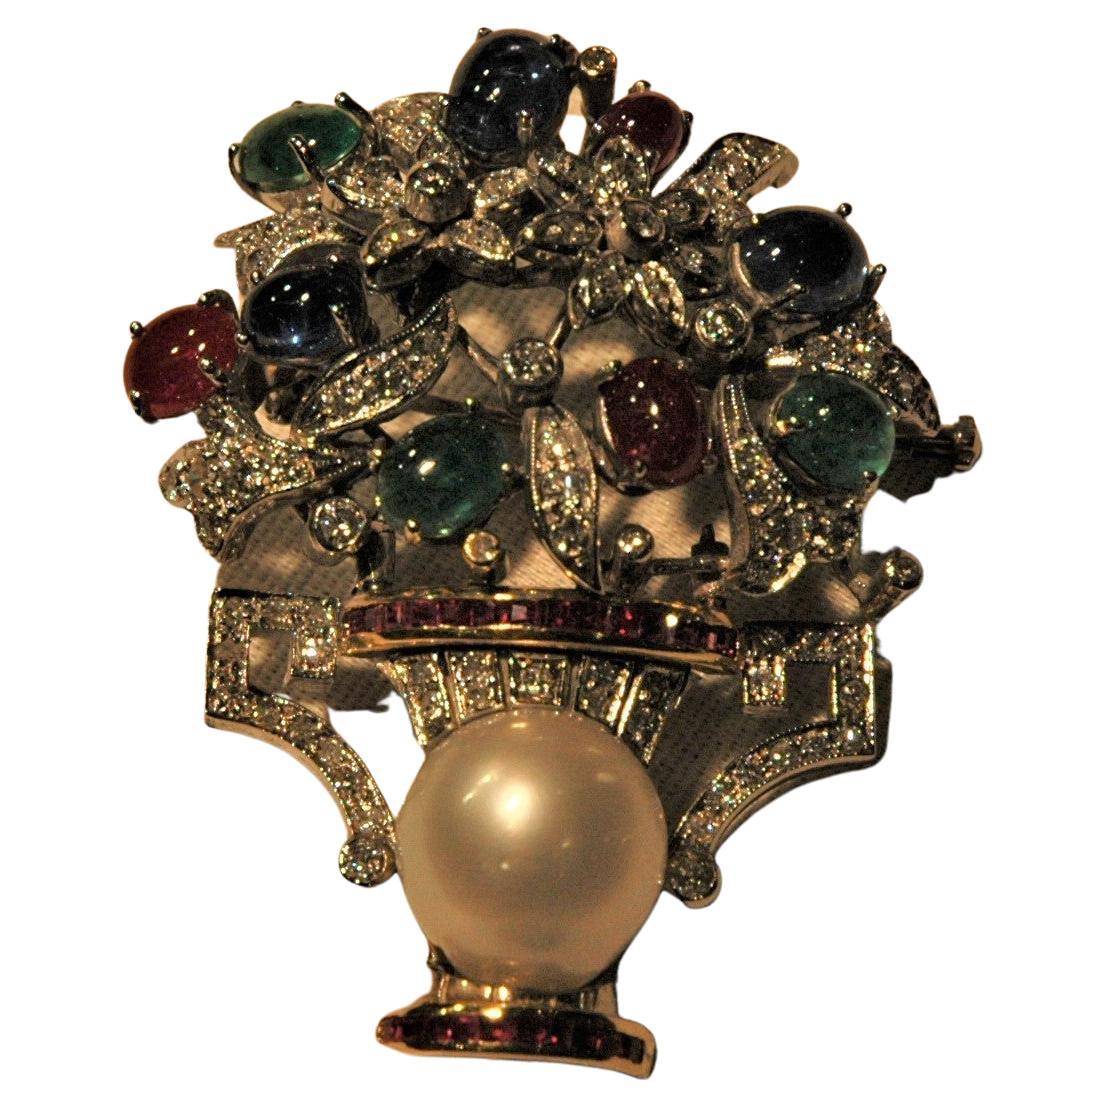 This is a wonderful flower brooch, handmade in Italy. It is realized in white gold with diamonds, three blu cabochon sapphires, three cabochon emeralds, three cabochon rubies, some small carré and baguette rubies and a central white pearl. It